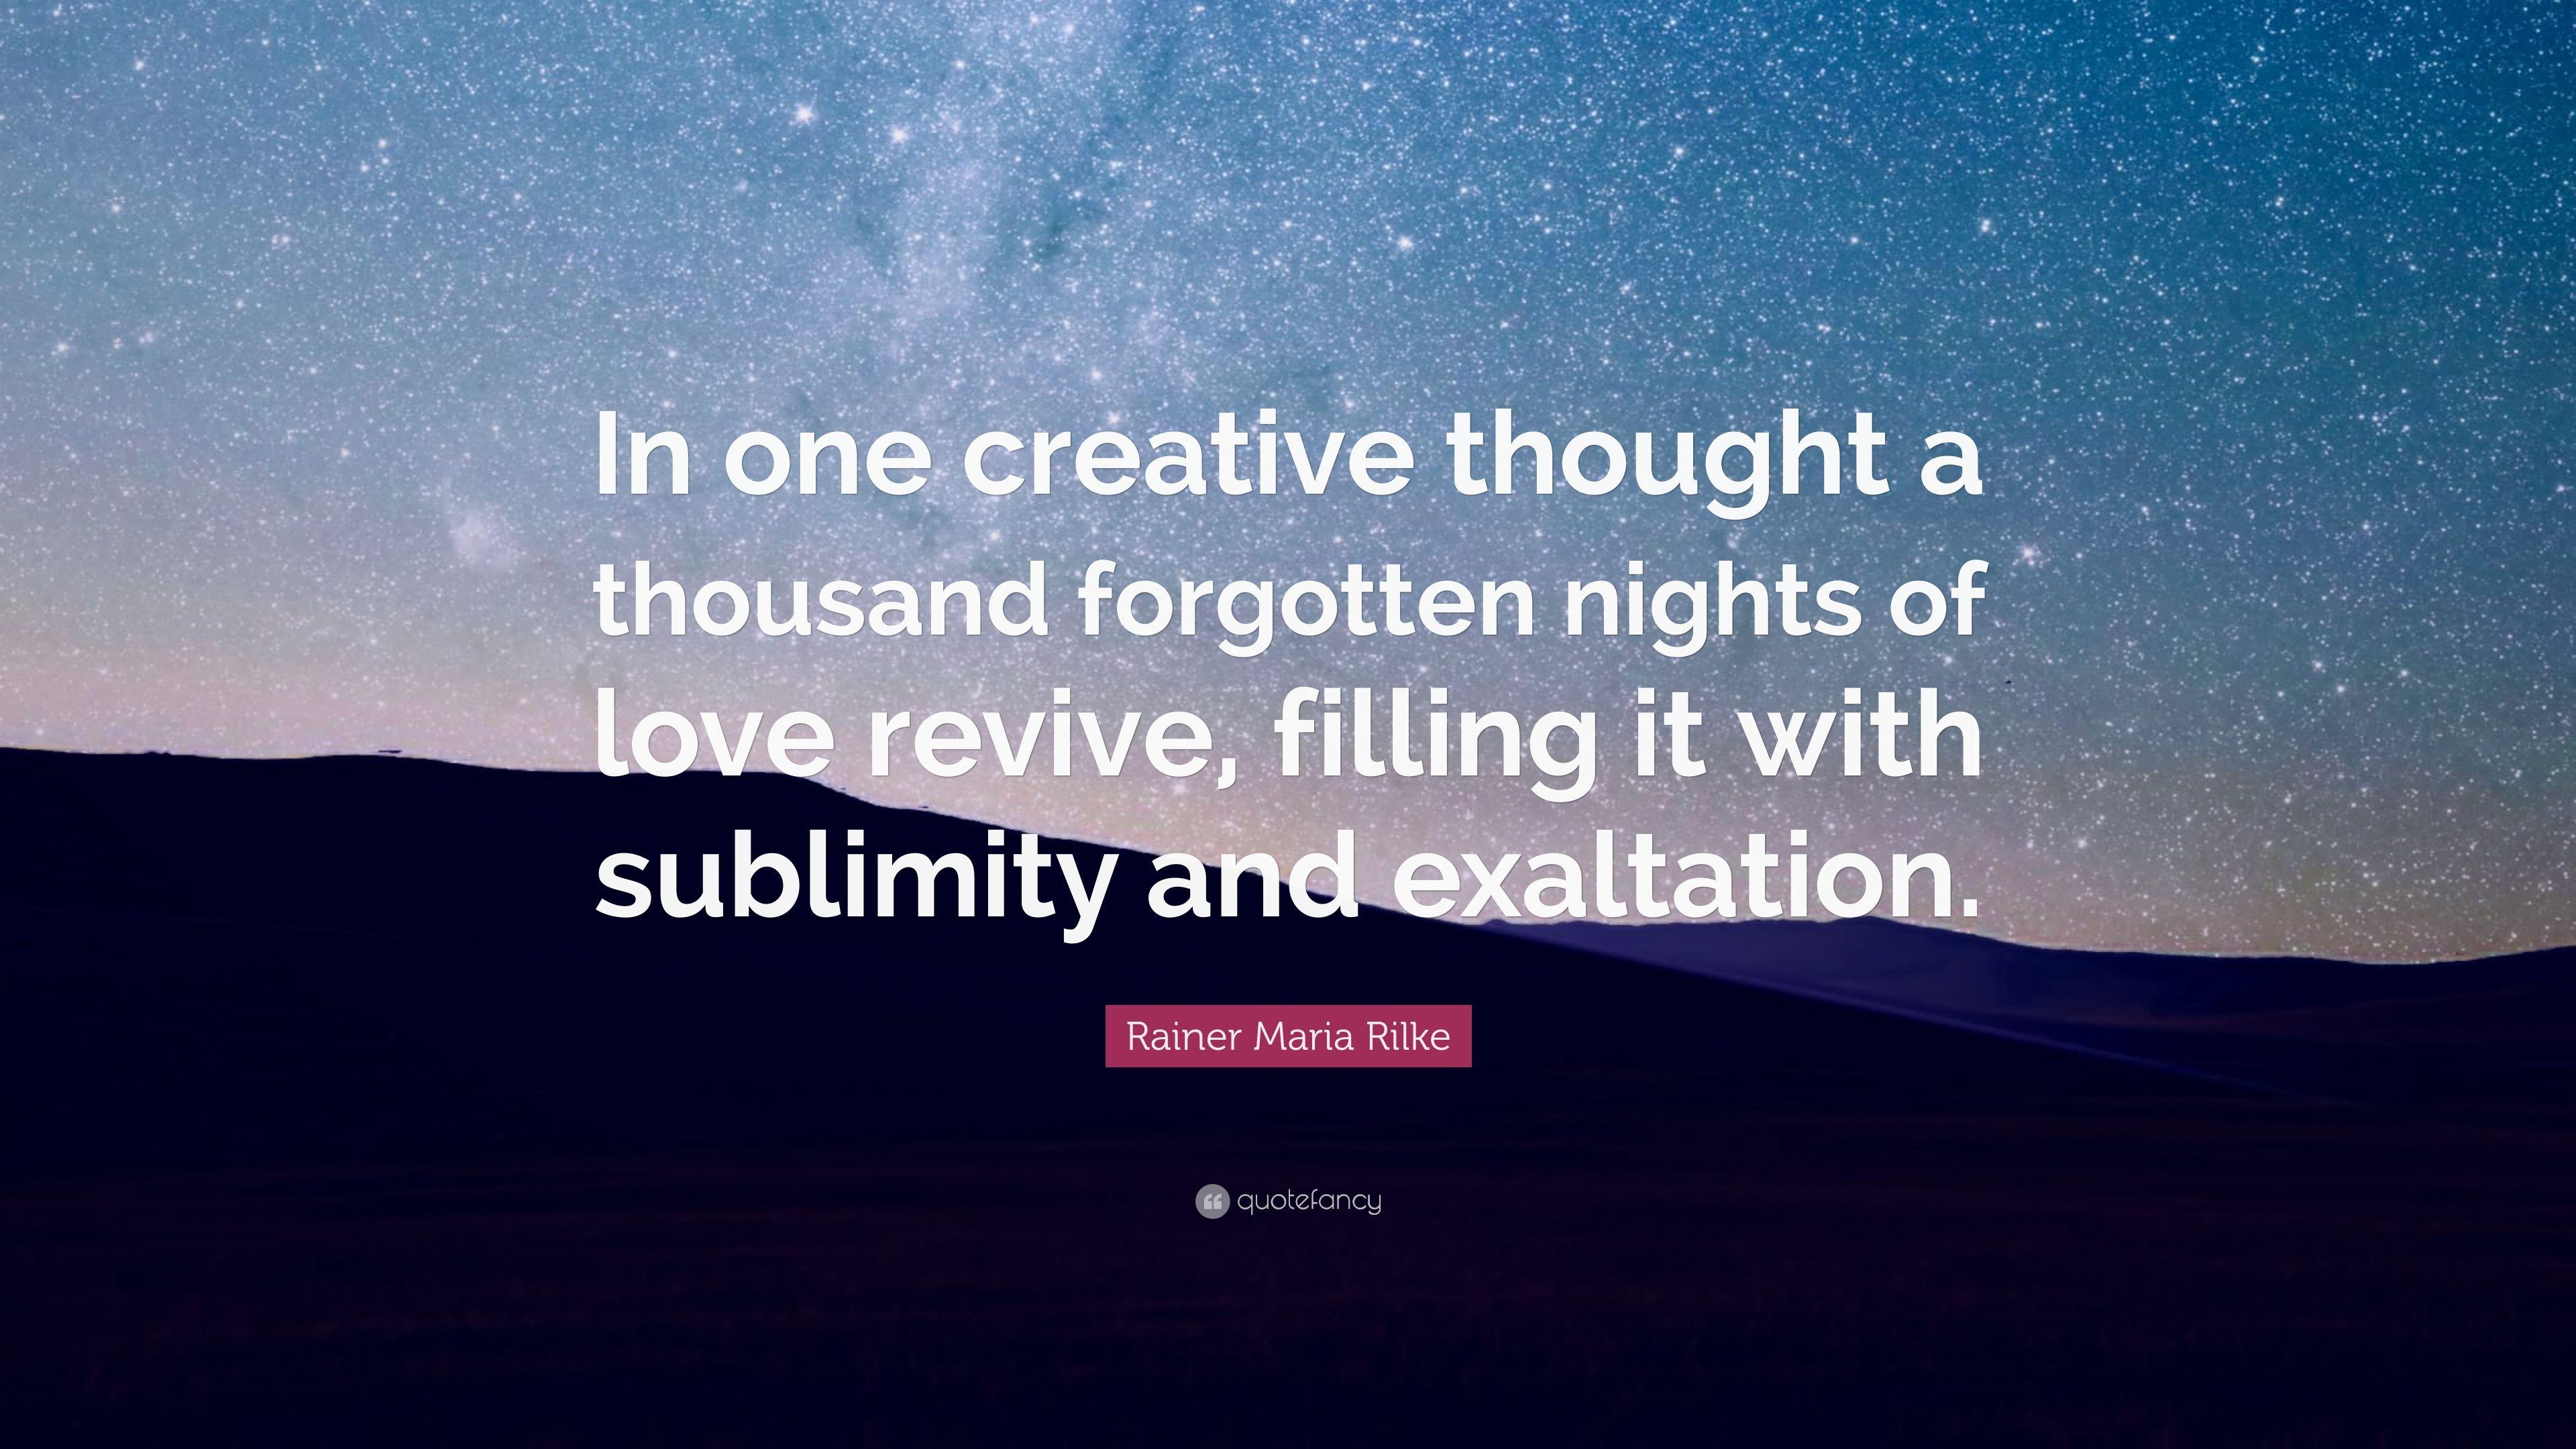 Rainer Maria Rilke Quote: “In one creative thought a thousand